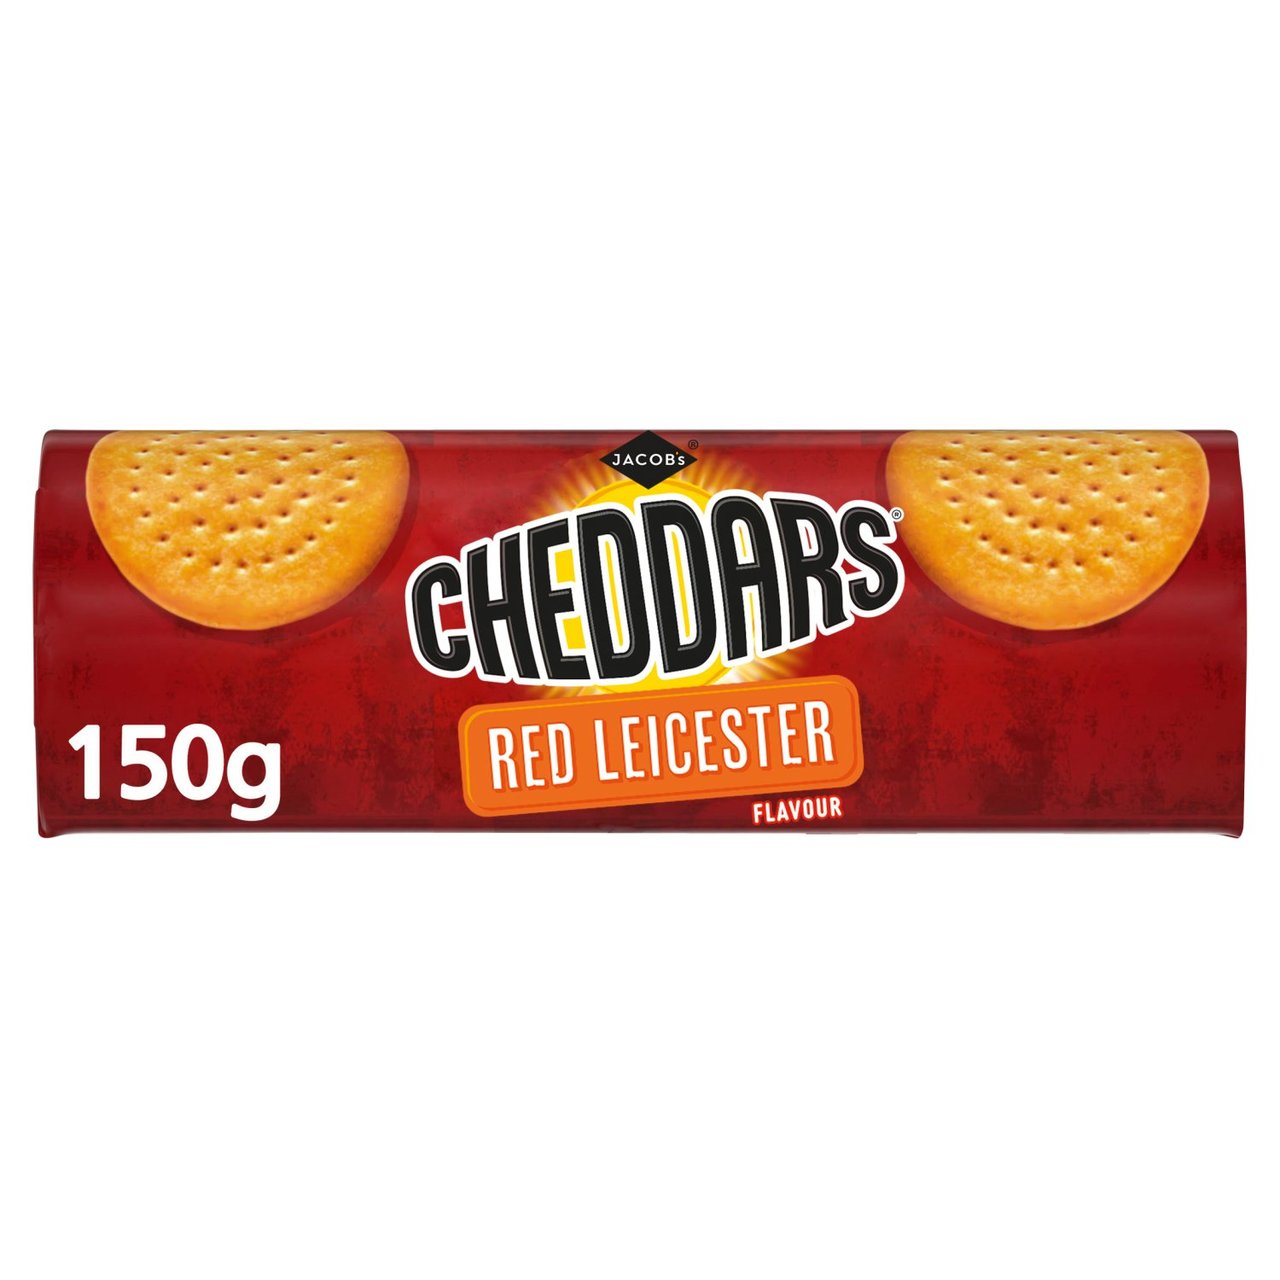 Jacobs Cheddars Red Leicester Flavour 150g